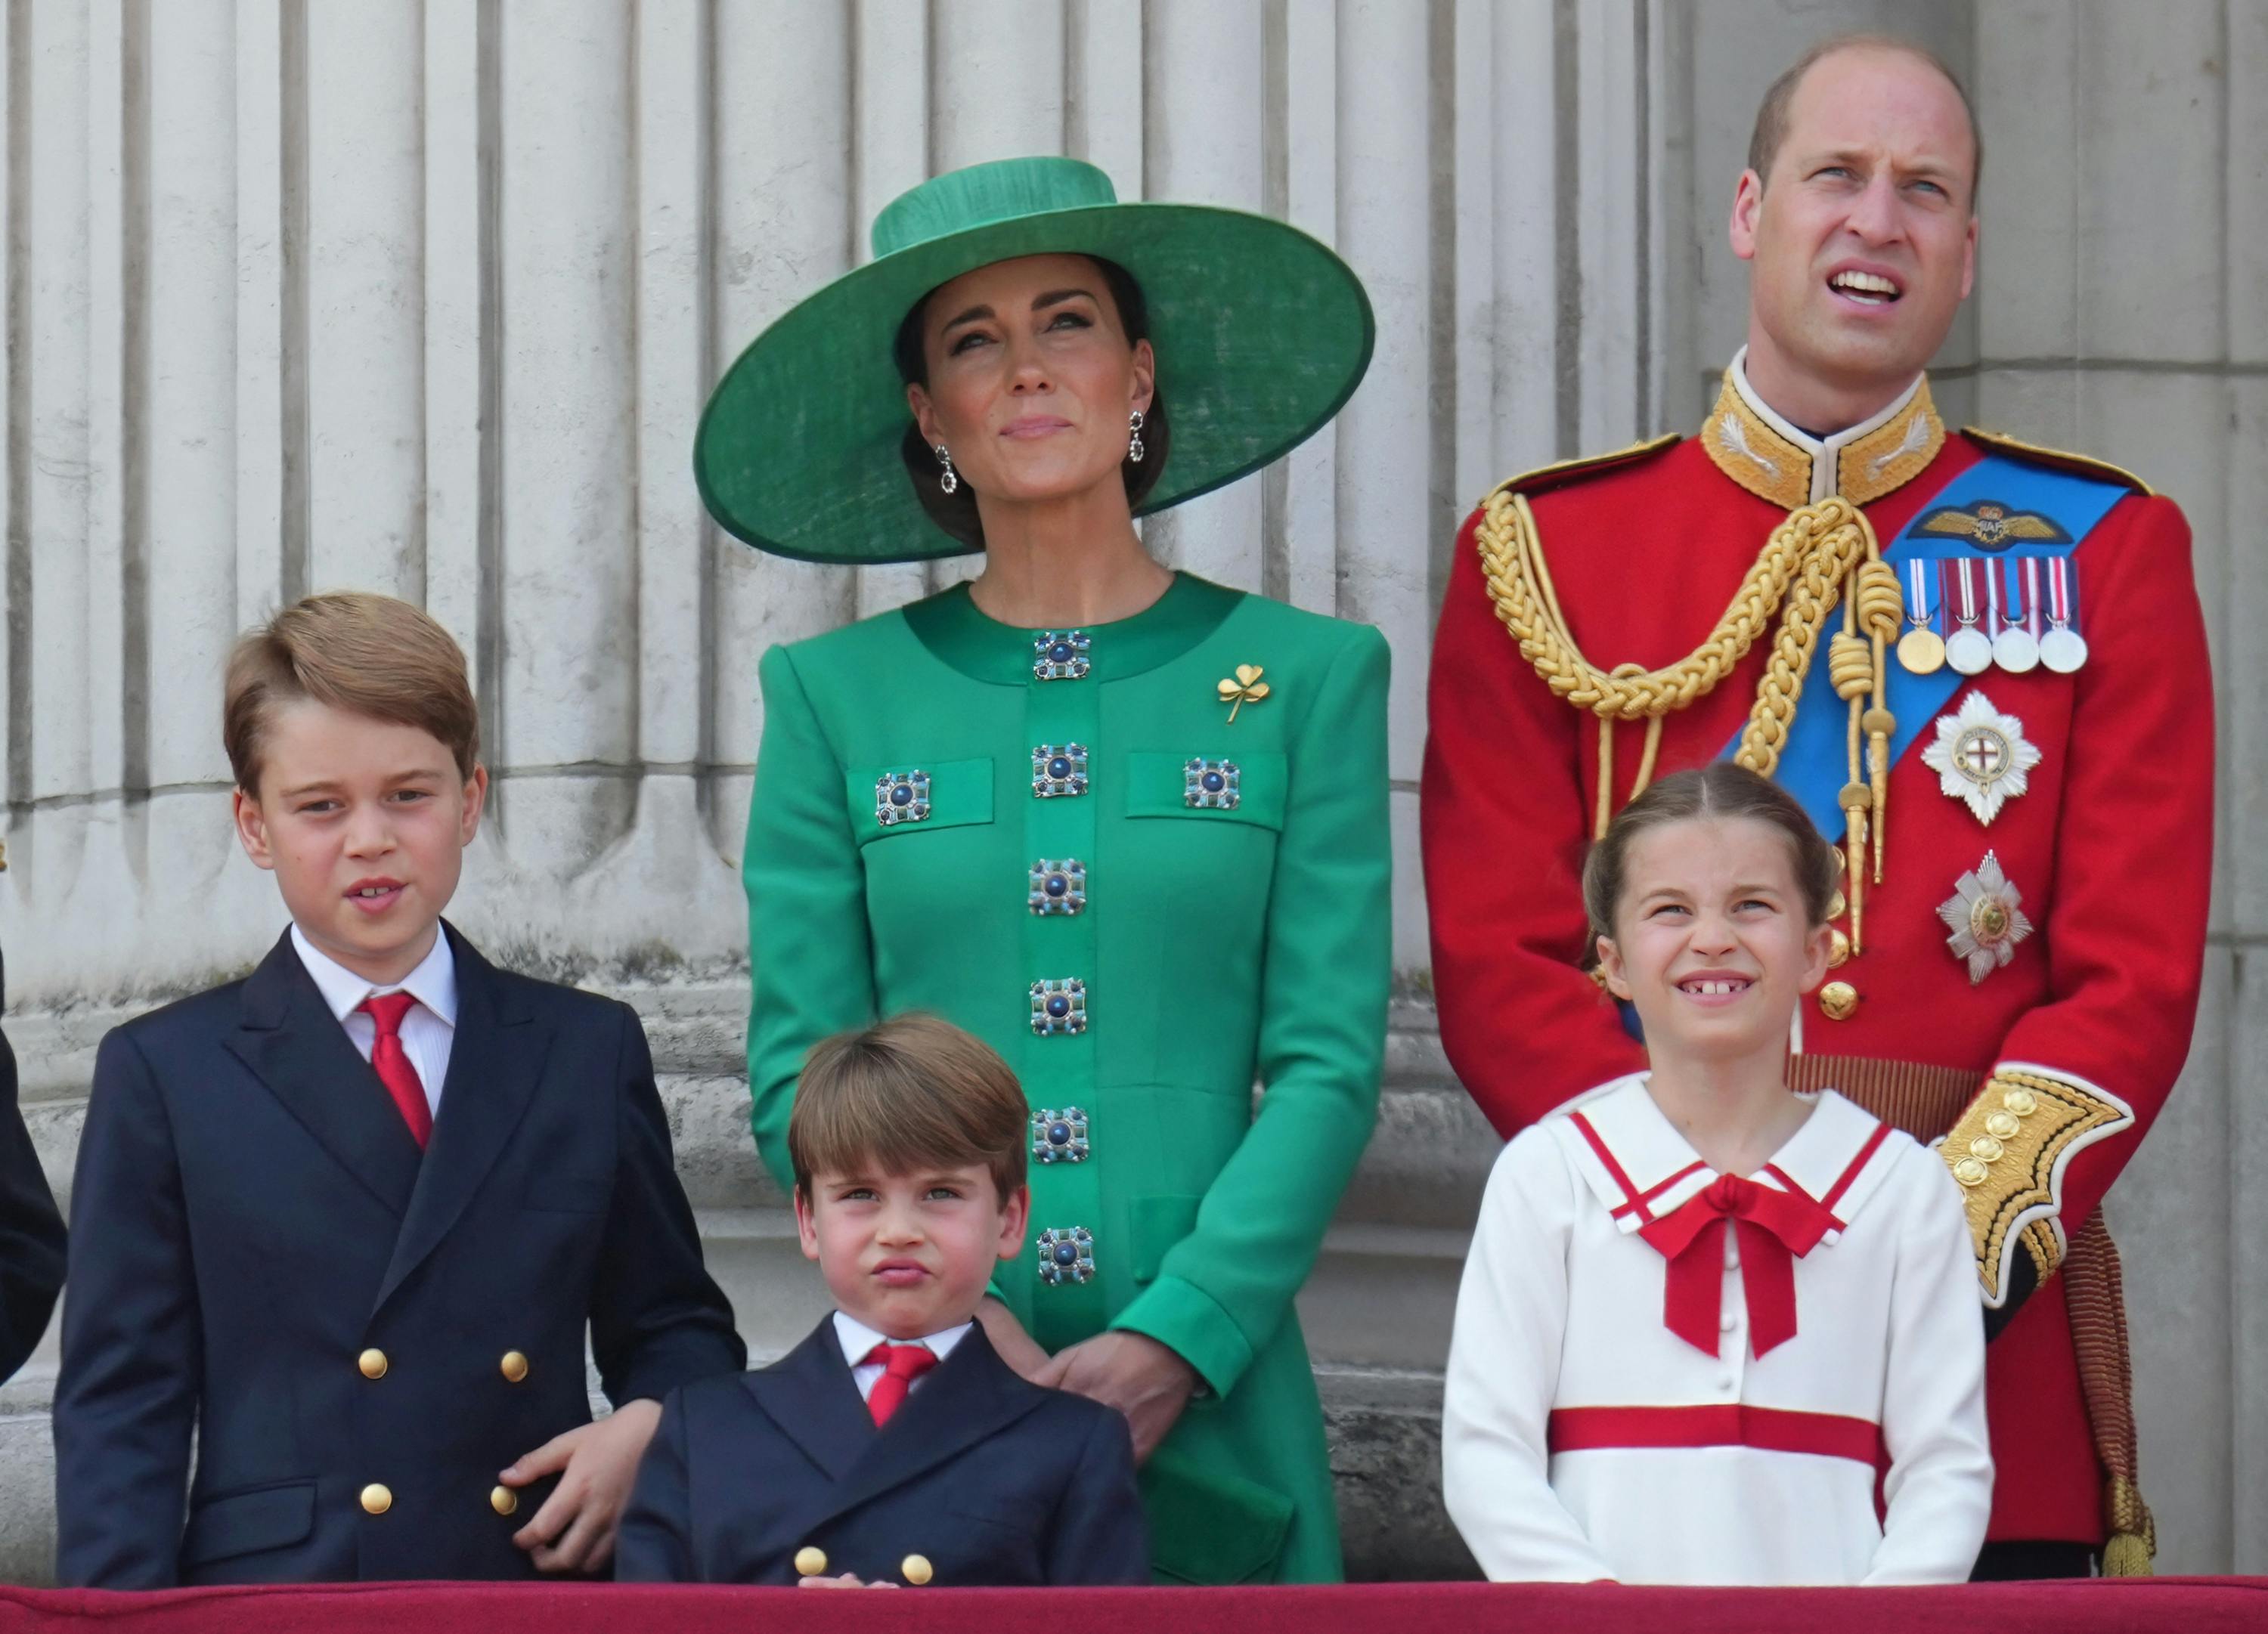 Members of the Royal Family attend Trooping the Colour at Buckingham Palace, London, UK, on the 17th June 2023. 17 Jun 2023 Pictured: Prince George, Prince Louis, Catherine, Princess of Wales, Kate Middleton, Princess Charlotte, Prince William, Prince of Wales. Photo credit: James Whatling / MEGA TheMegaAgency.com +1 888 505 6342 (Mega Agency TagID: MEGA996761_022.jpg) [Photo via Mega Agency]